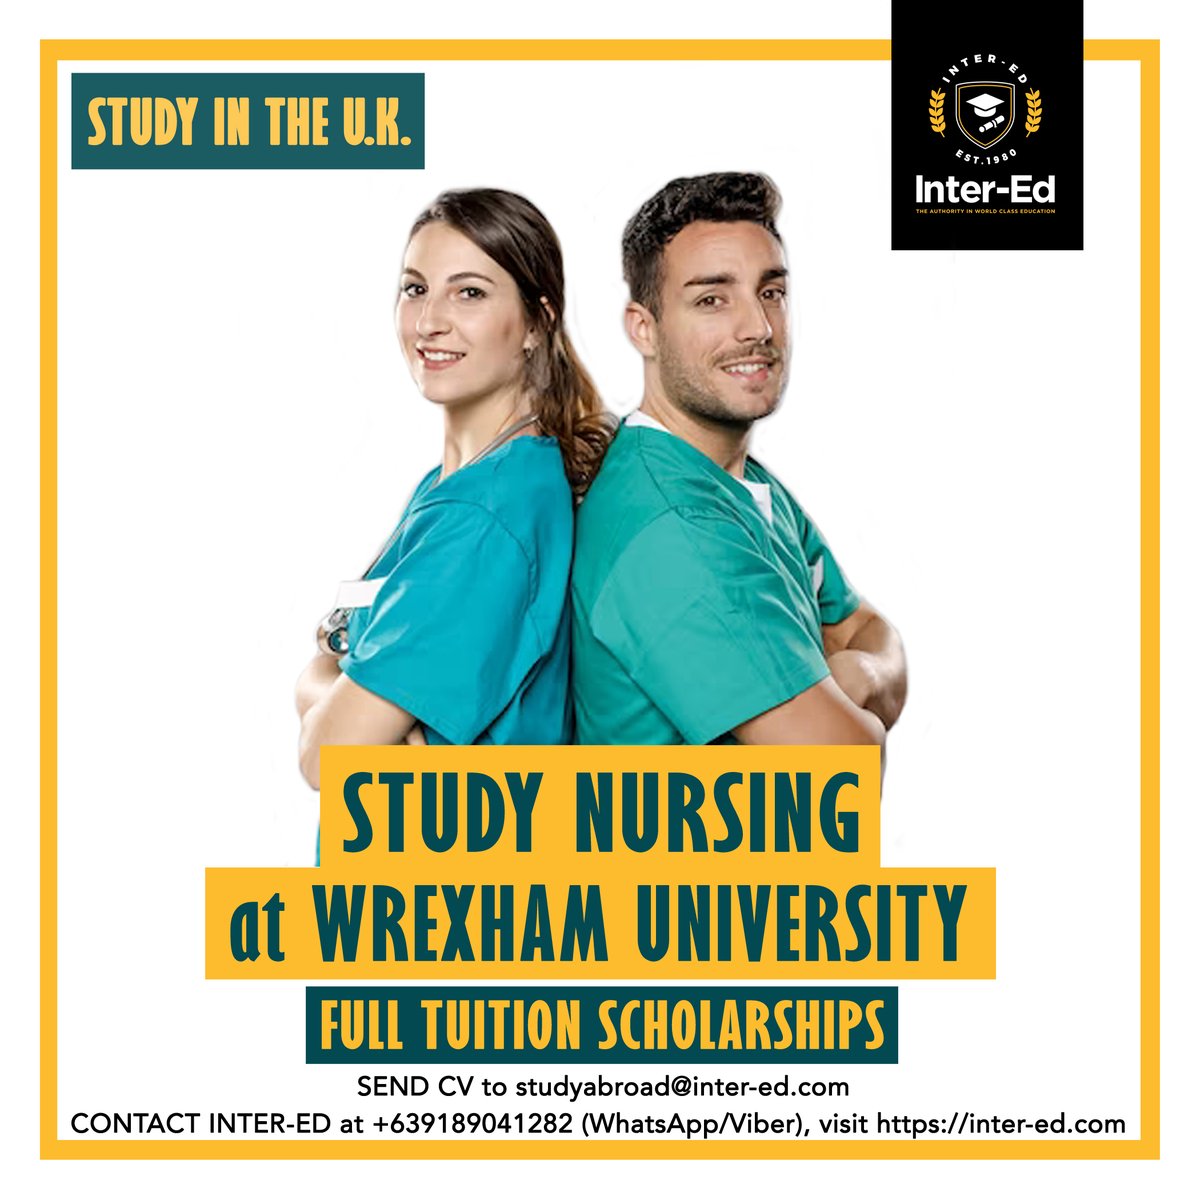 STUDY IN THE UK!!!

Wrexham University is making 60 full three-year nursing scholarships available to the Philippines for students graduating from Grade 12 SHS. 

Send CV to studyabroad@inter-ed.com for review.

#InterEdPH #StudyAbroad #LiveAbroad #UK #Nursing #WrexhamUniversity